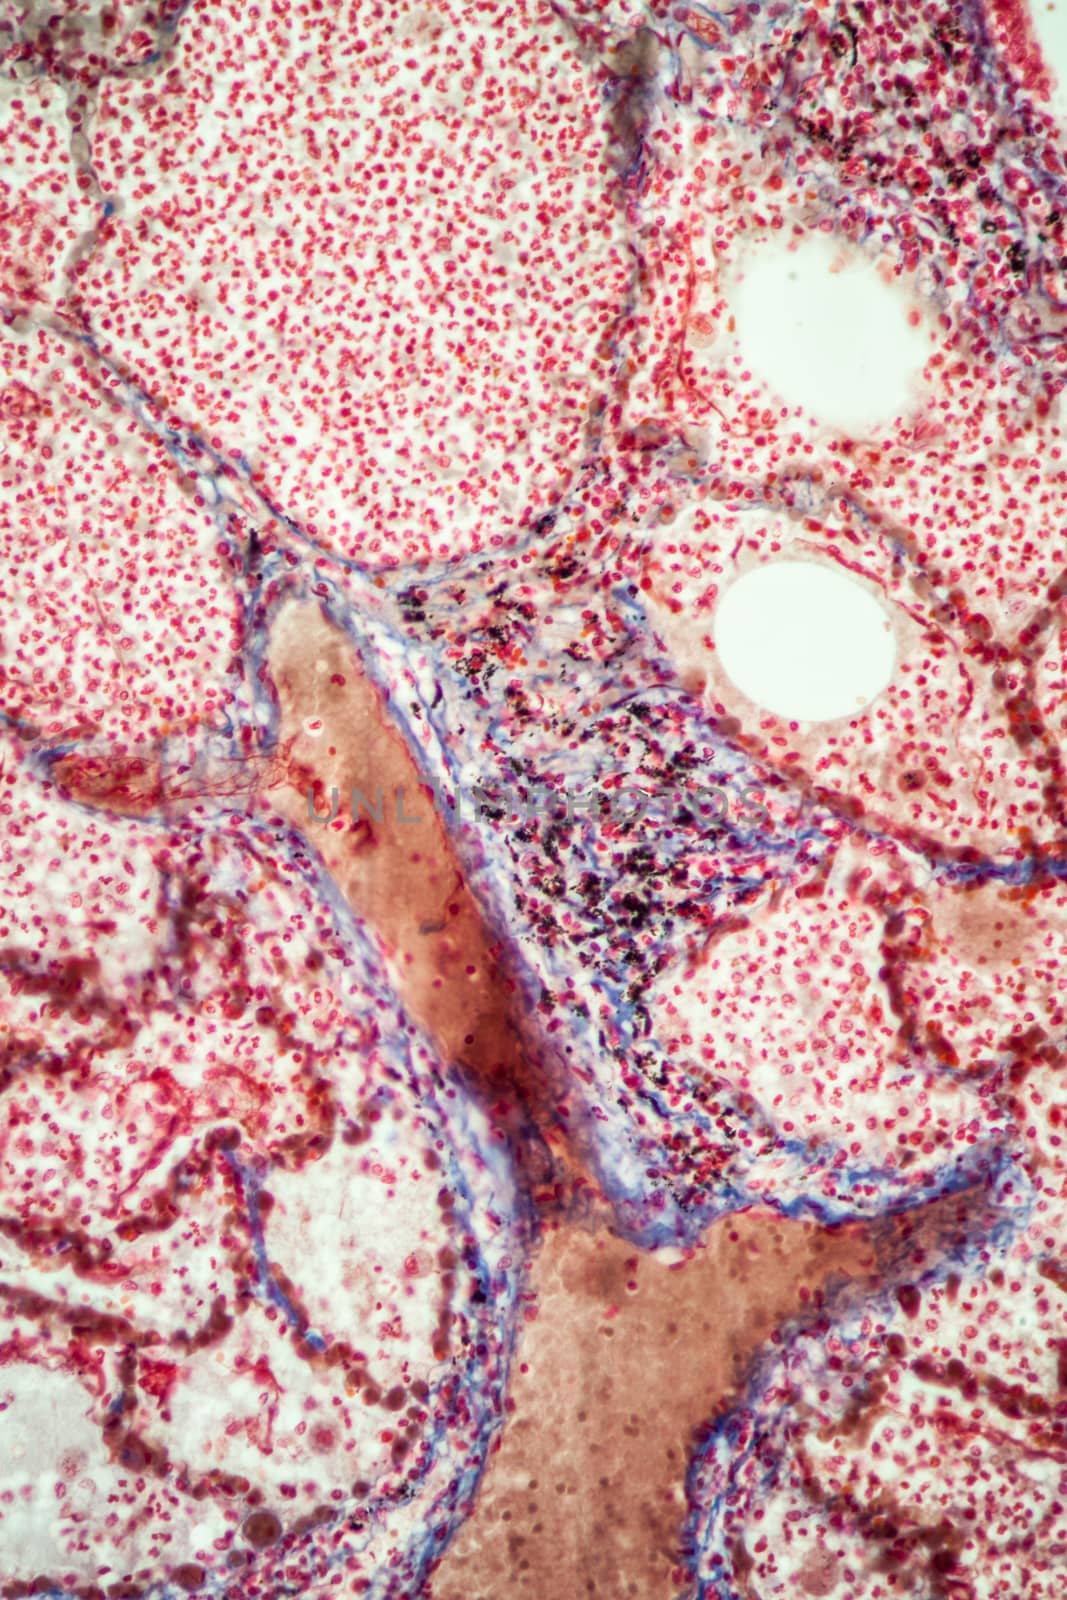 Tuberculosis tissue under the microscope 100x by Dr-Lange